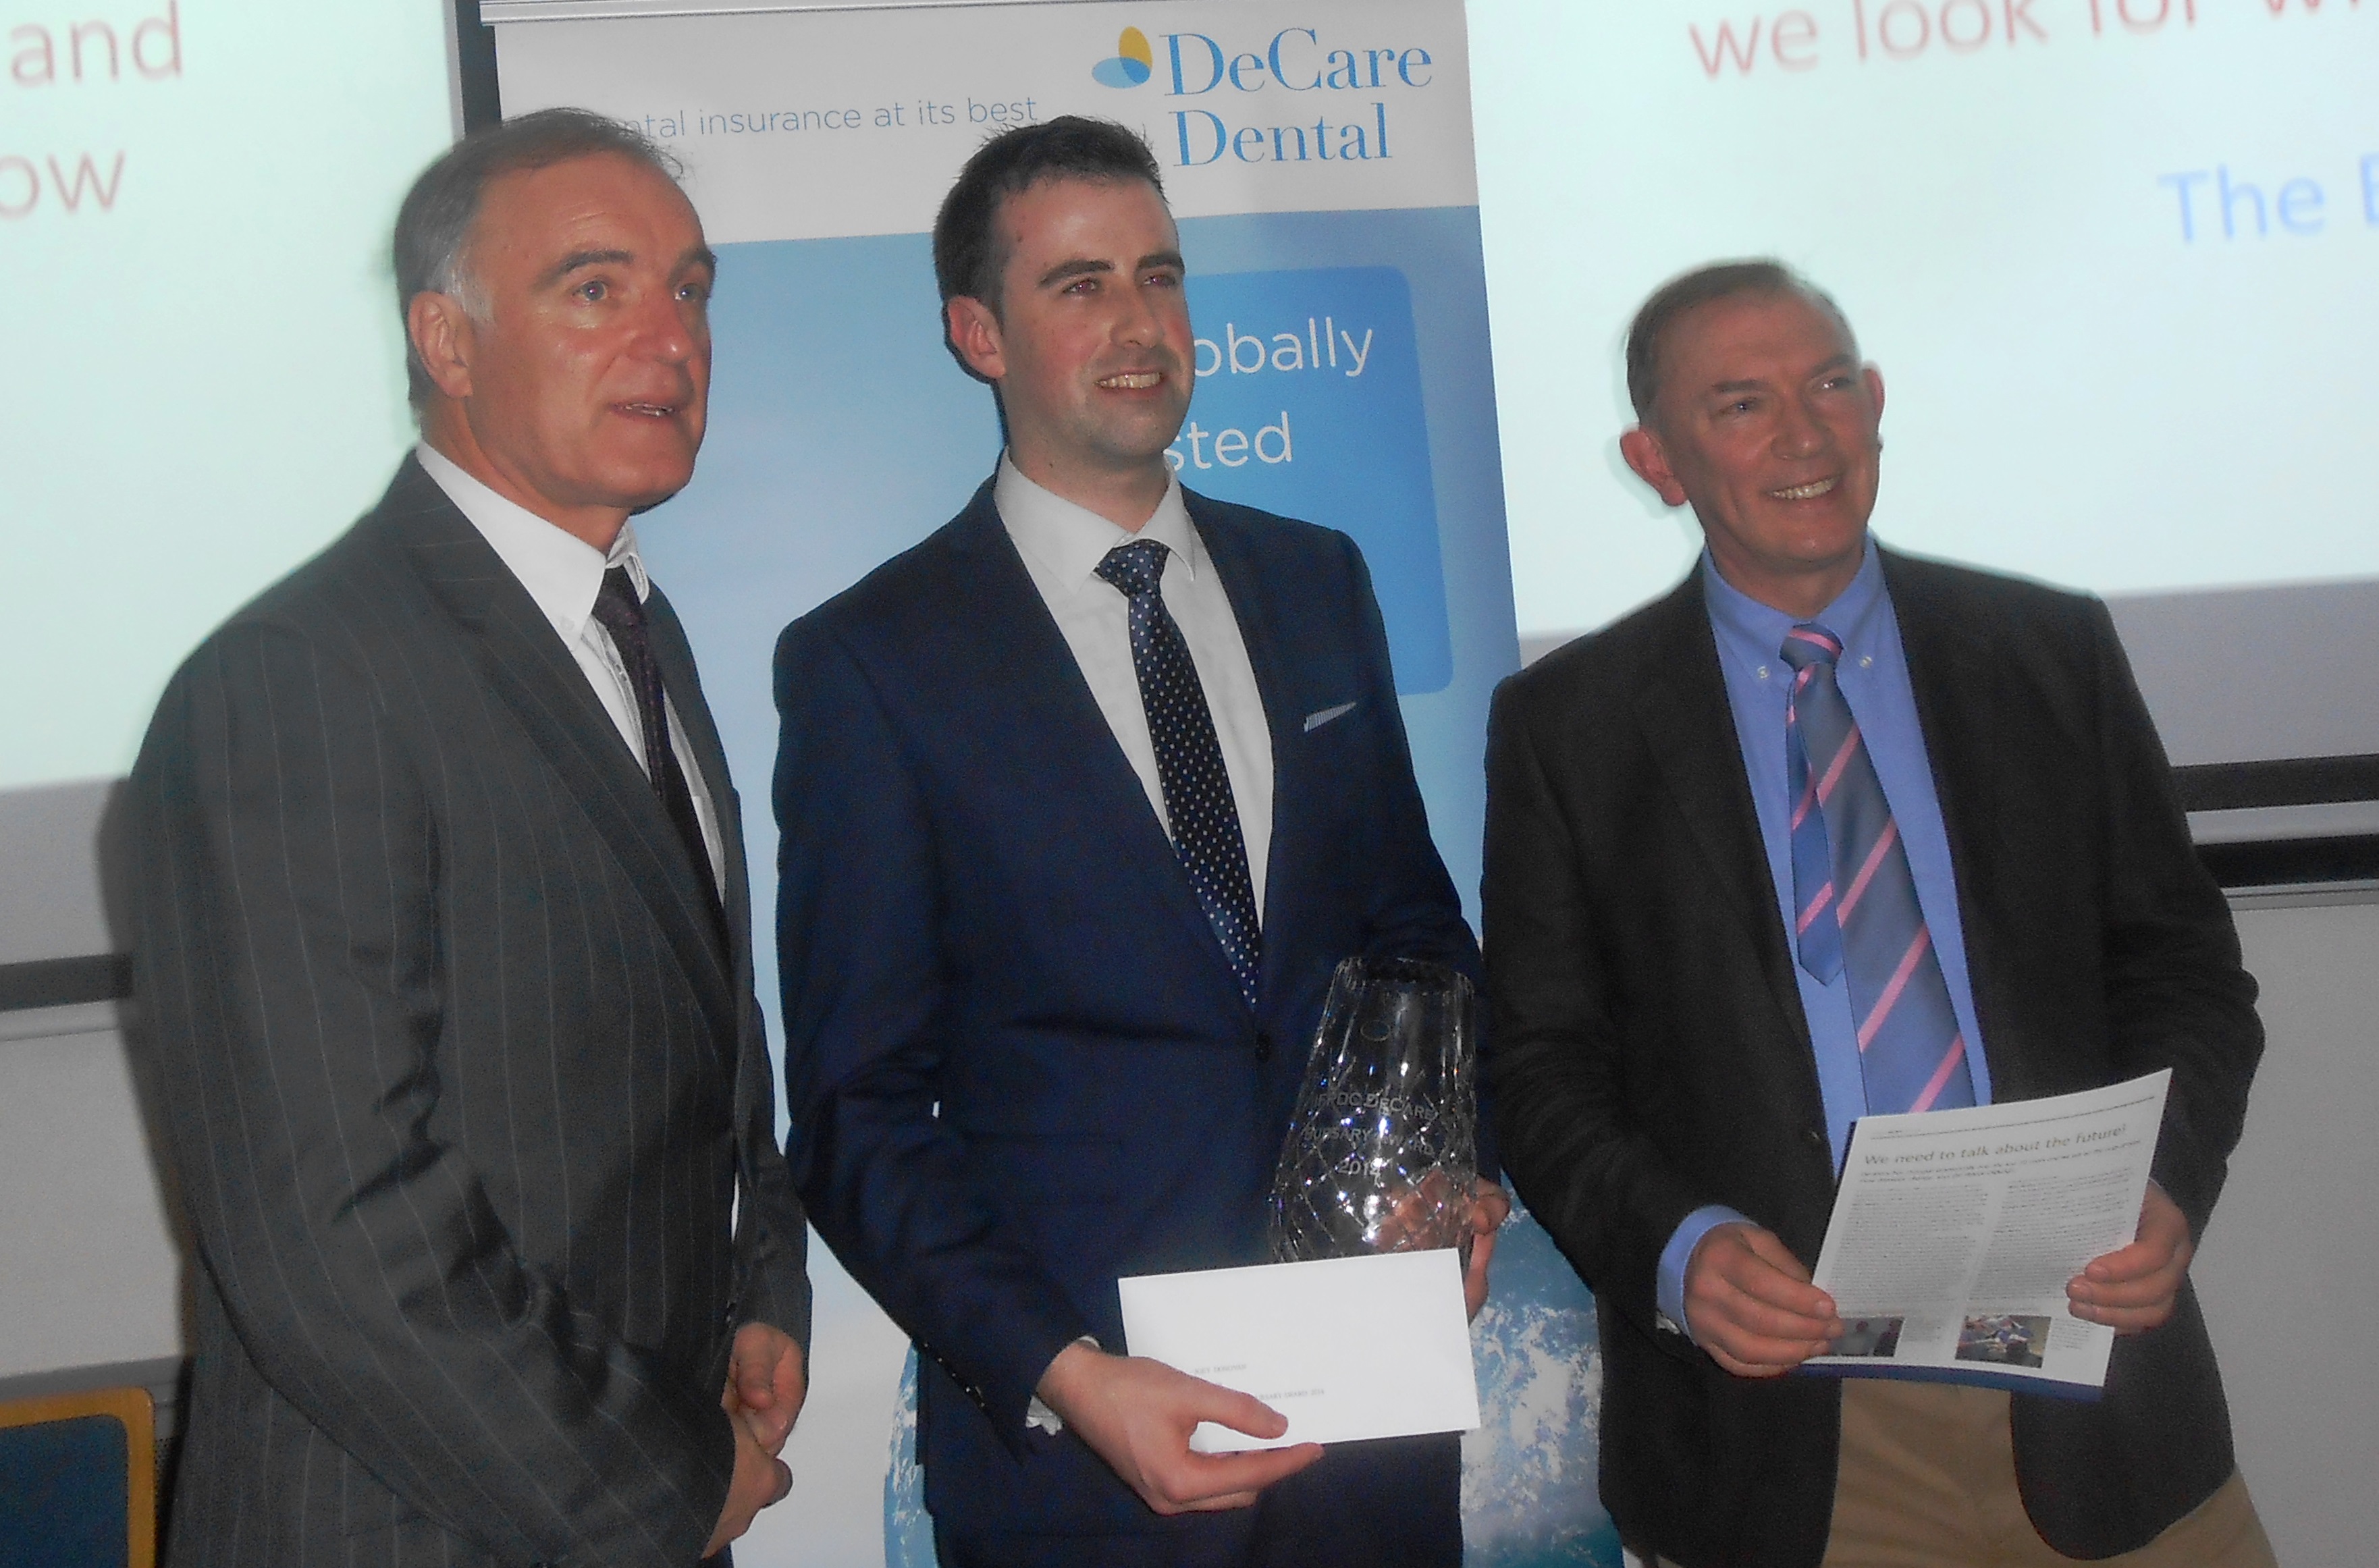 Joey Dovovan was awarded the DeCare